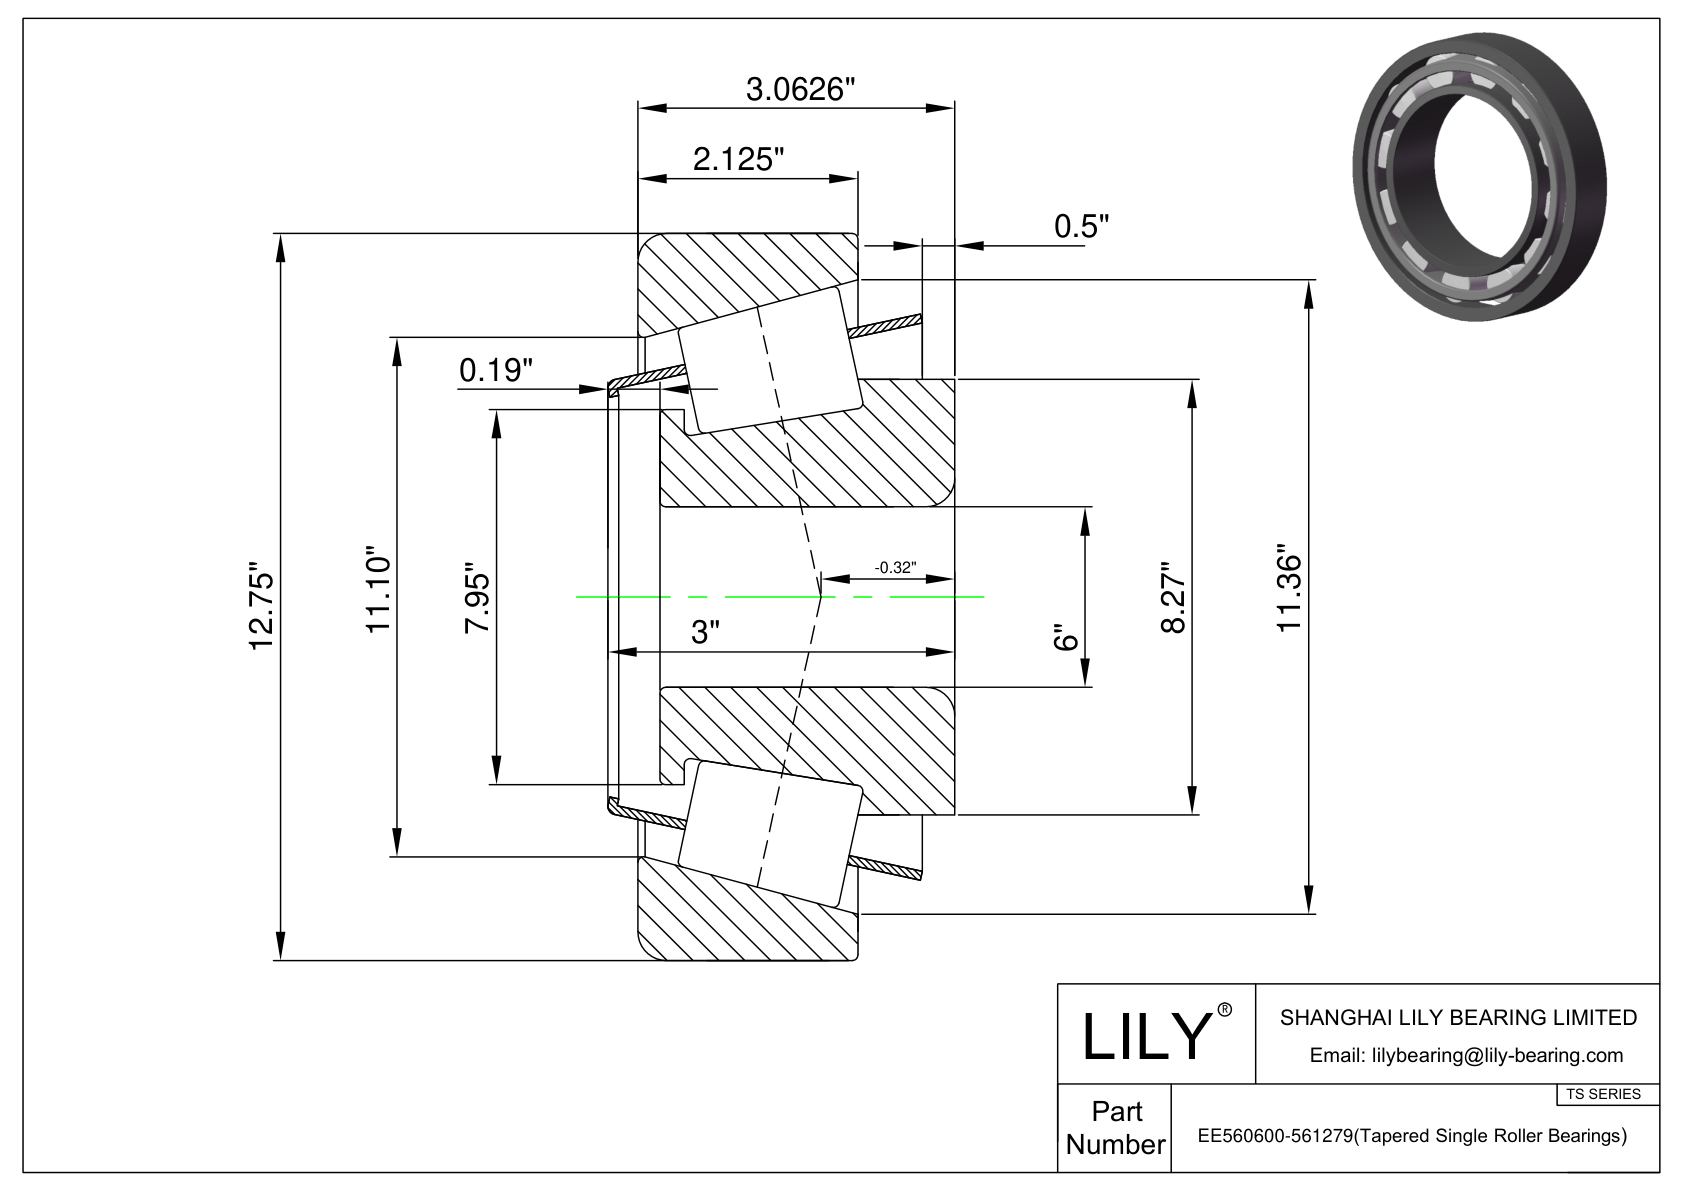 EE560600-561279 TS (Tapered Single Roller Bearings) (Imperial) cad drawing